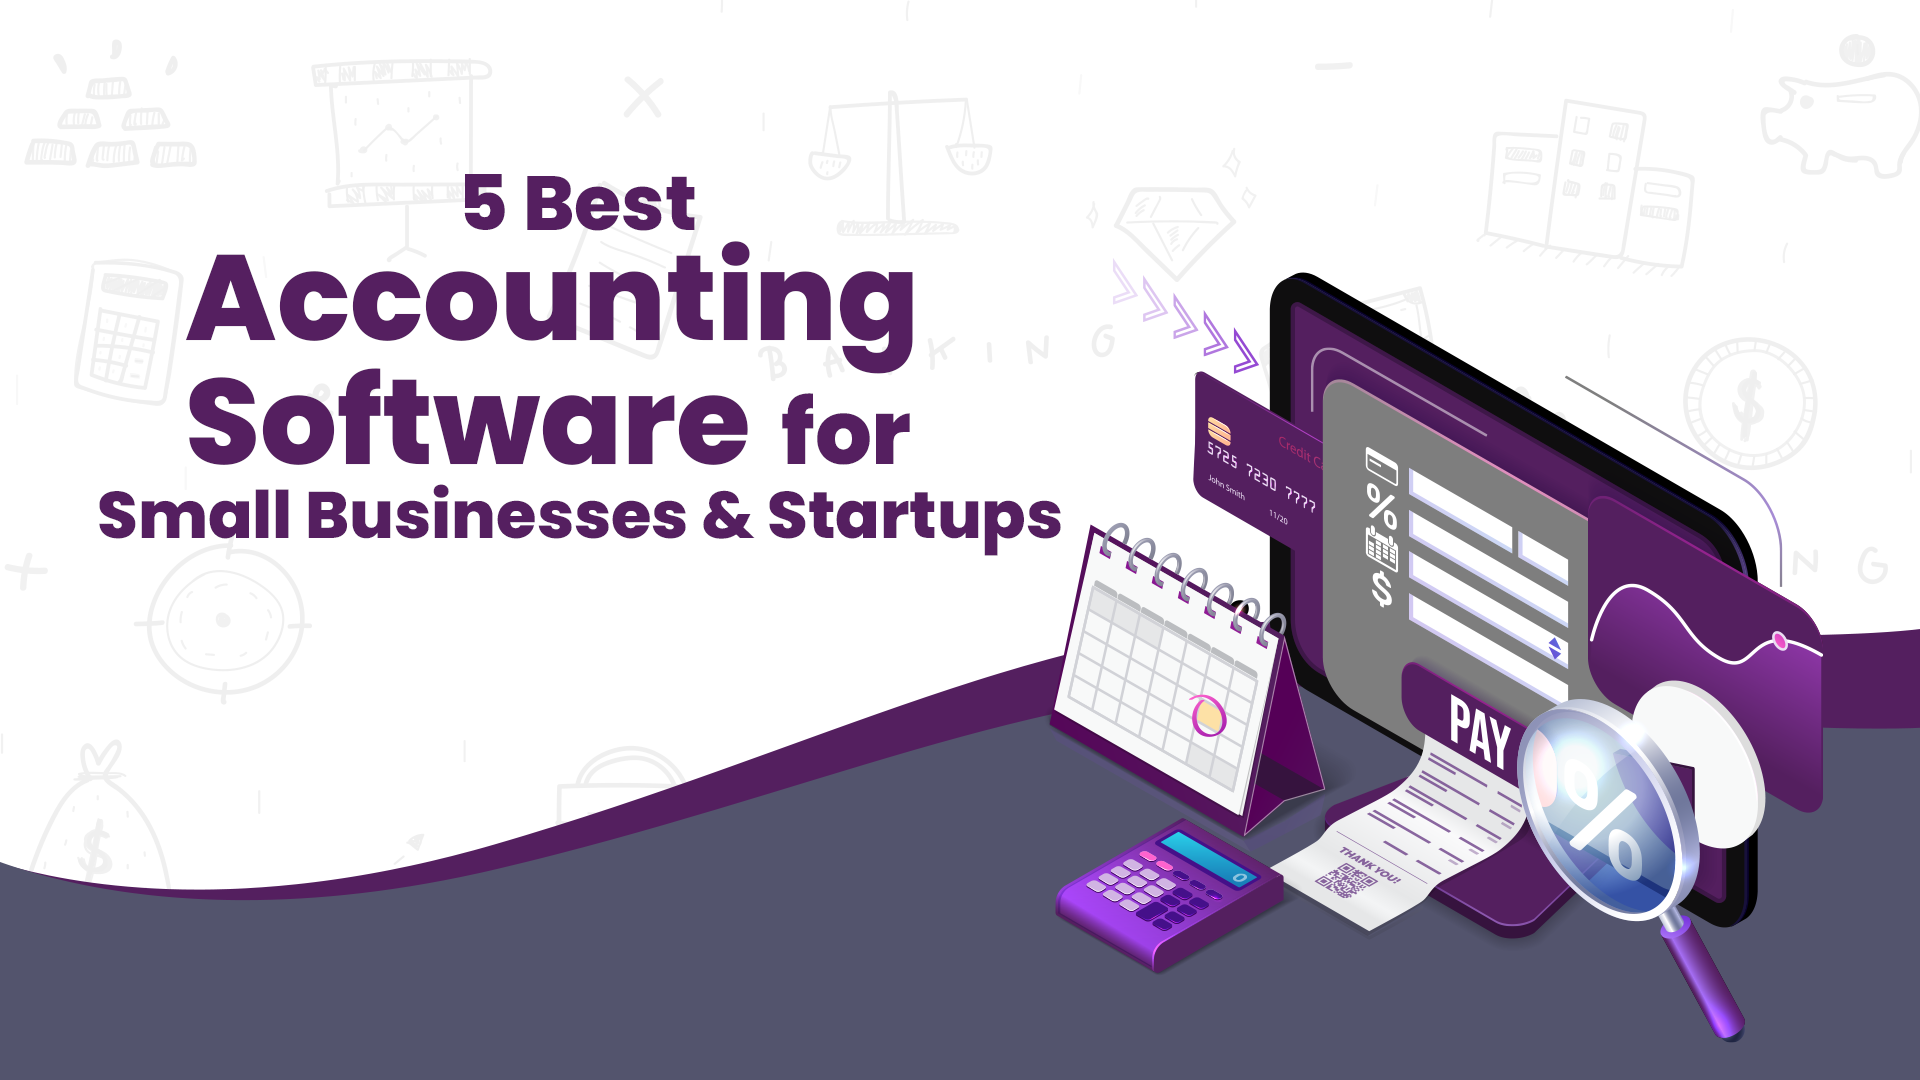 Top 5 Accounting Software for Small Business